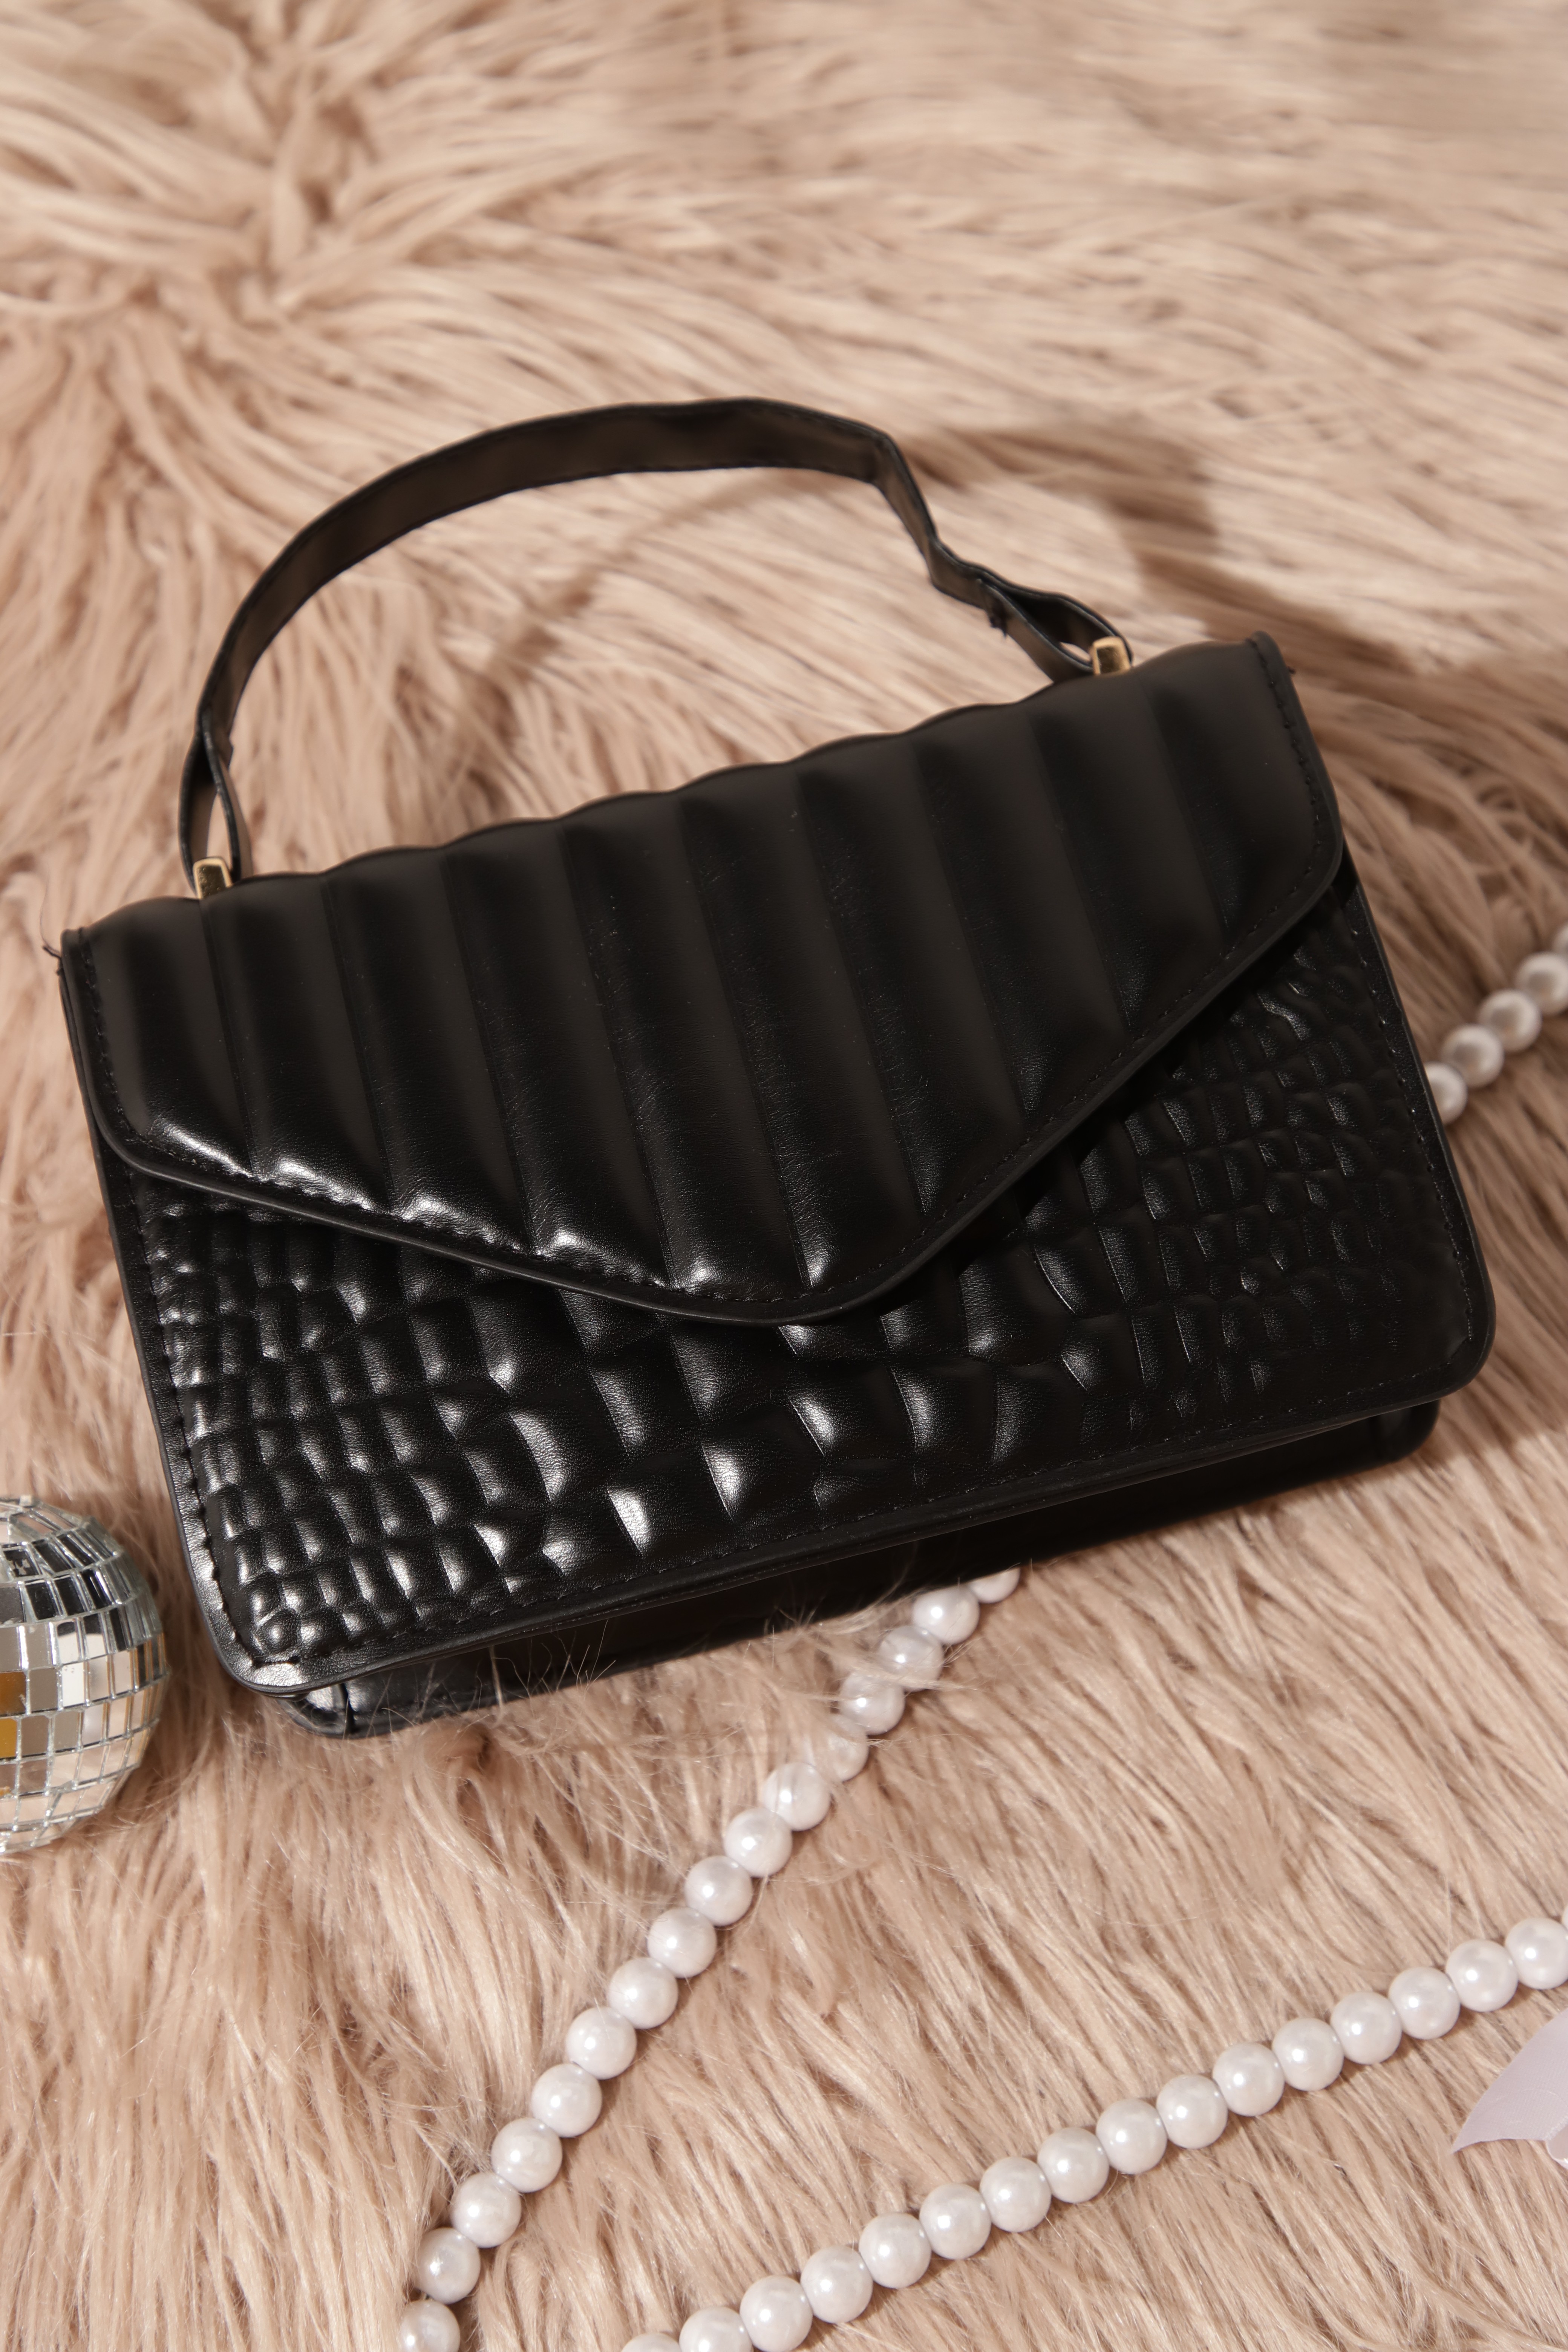 KNOWN FOR REAL BLACK QUILTED HANDBAG